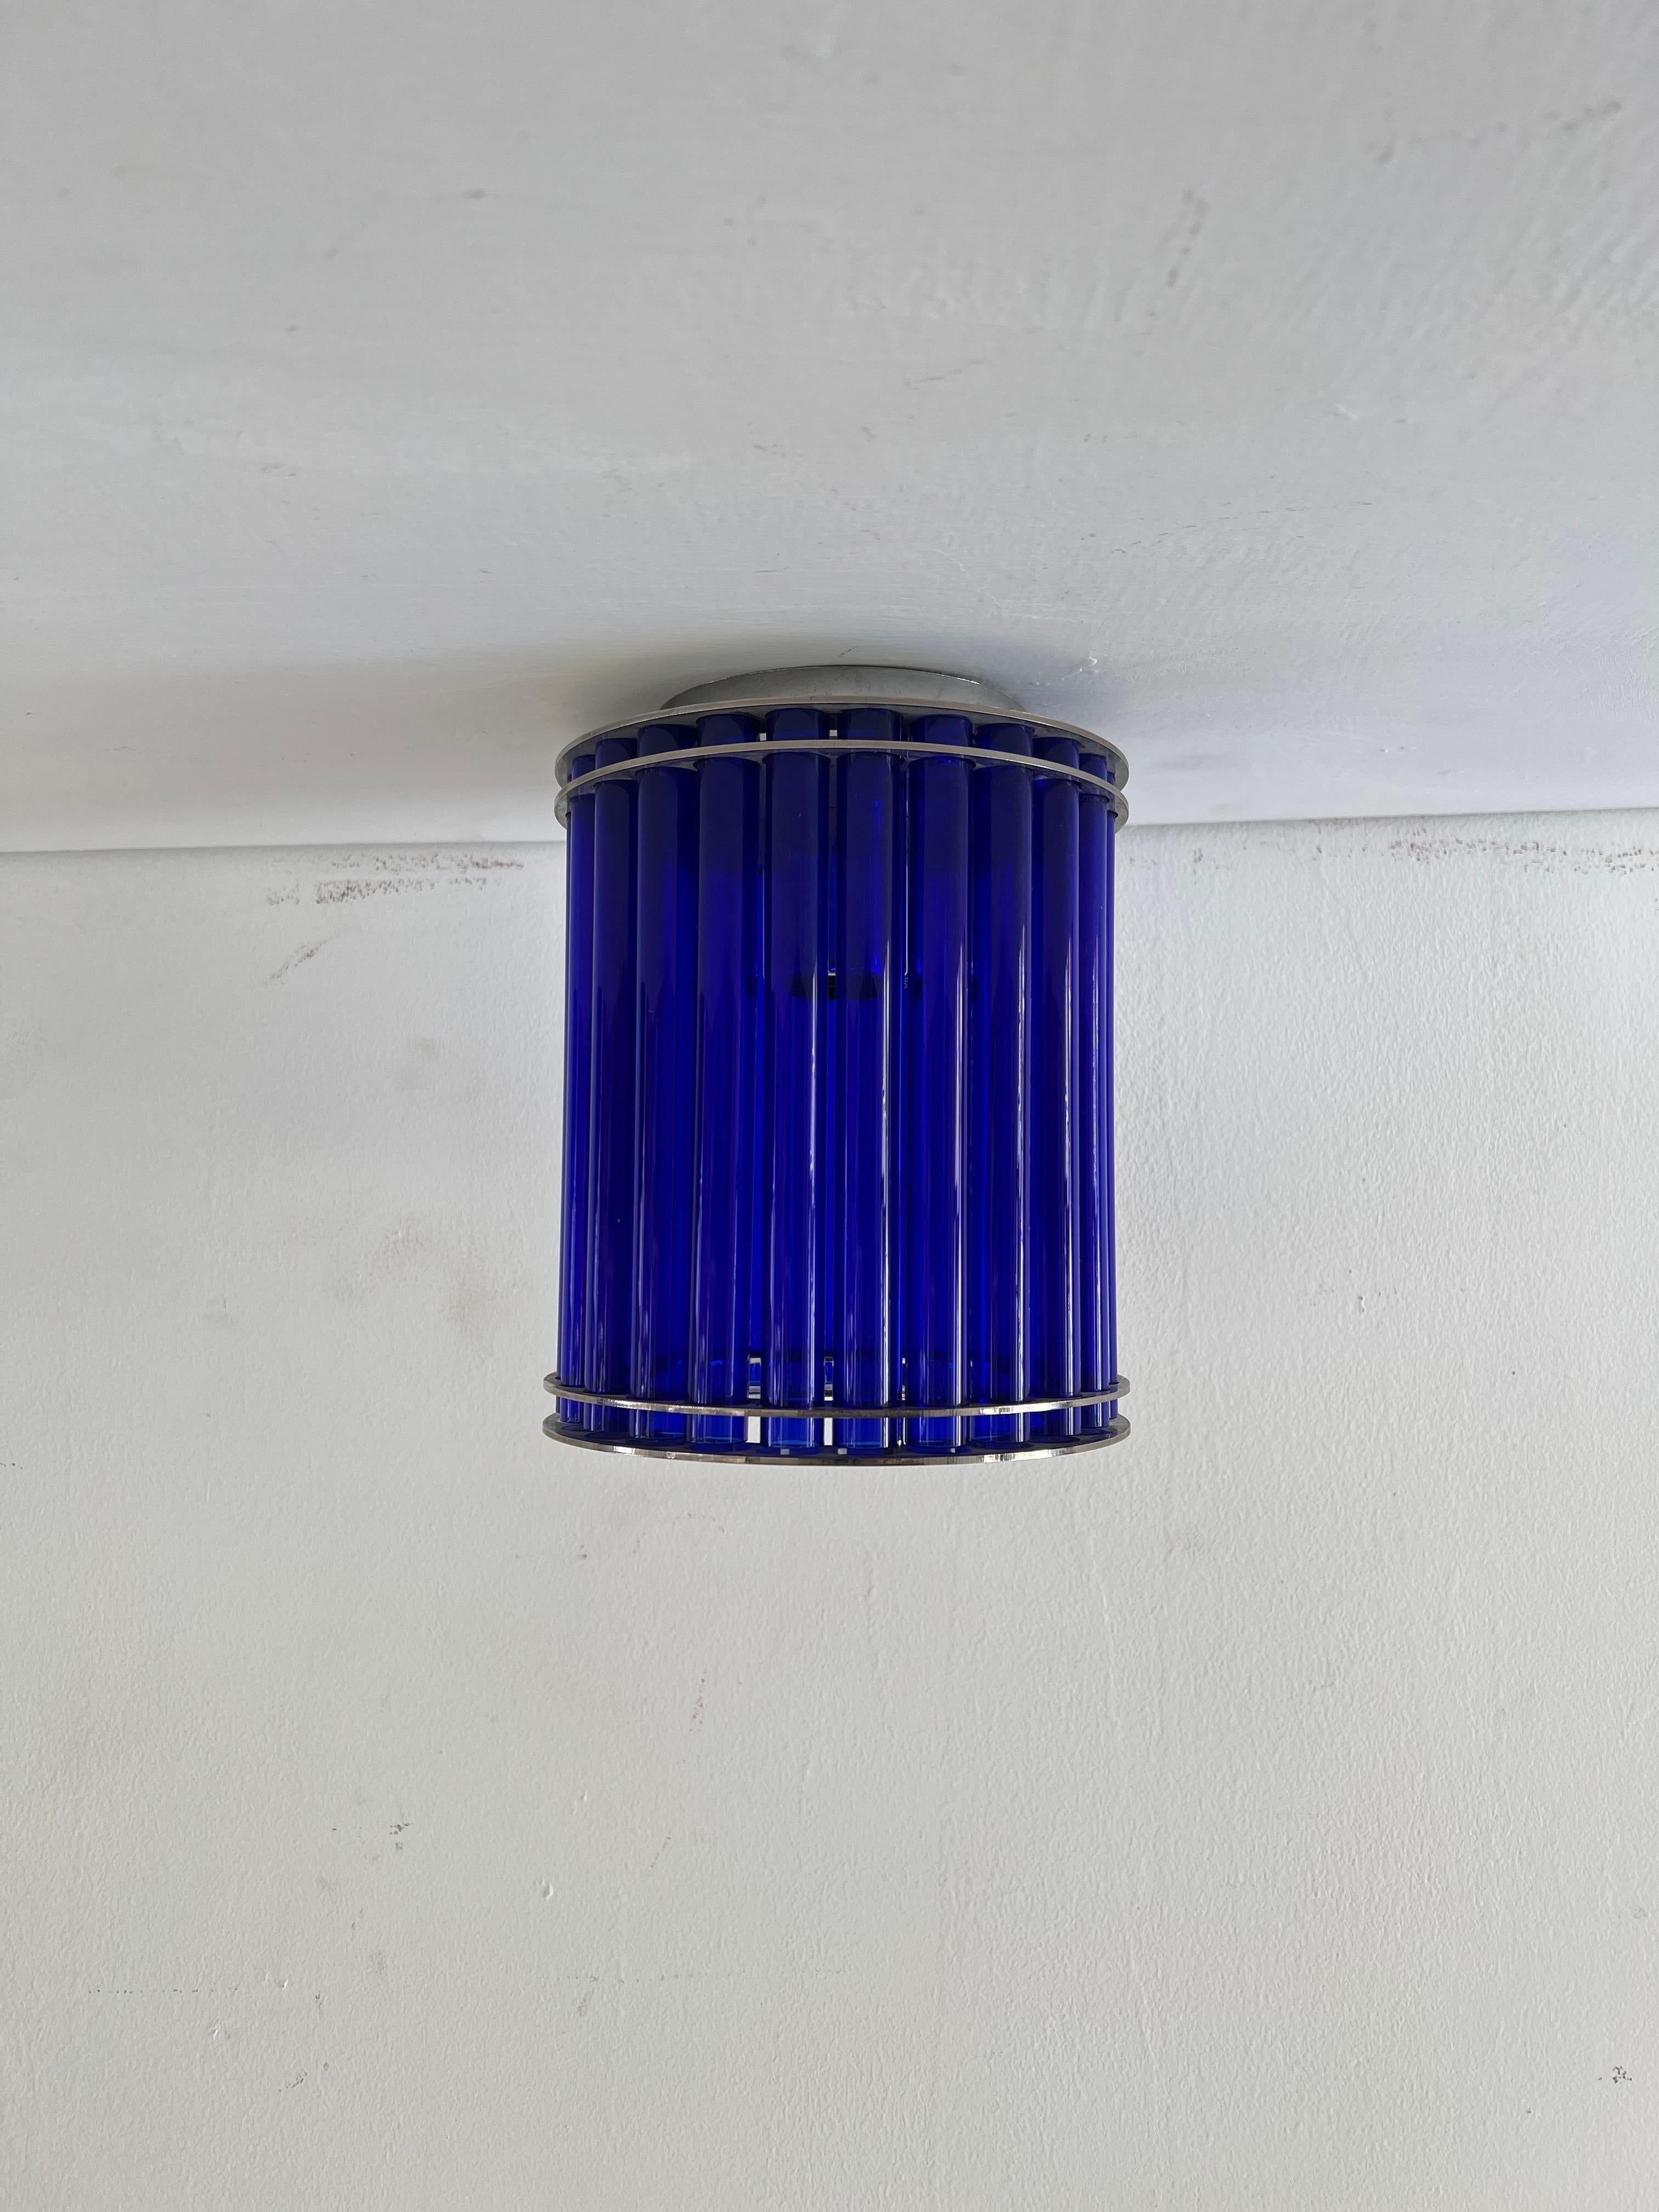 Beautiful flush Mount manufactured in Chromed Metal and Blue Murano glass tubes.
It is very similar to the style and tonalities explored by Venini under the designes by Ettore Sottsass in the 1980s.
This can also be adapted to hung from a chain as a